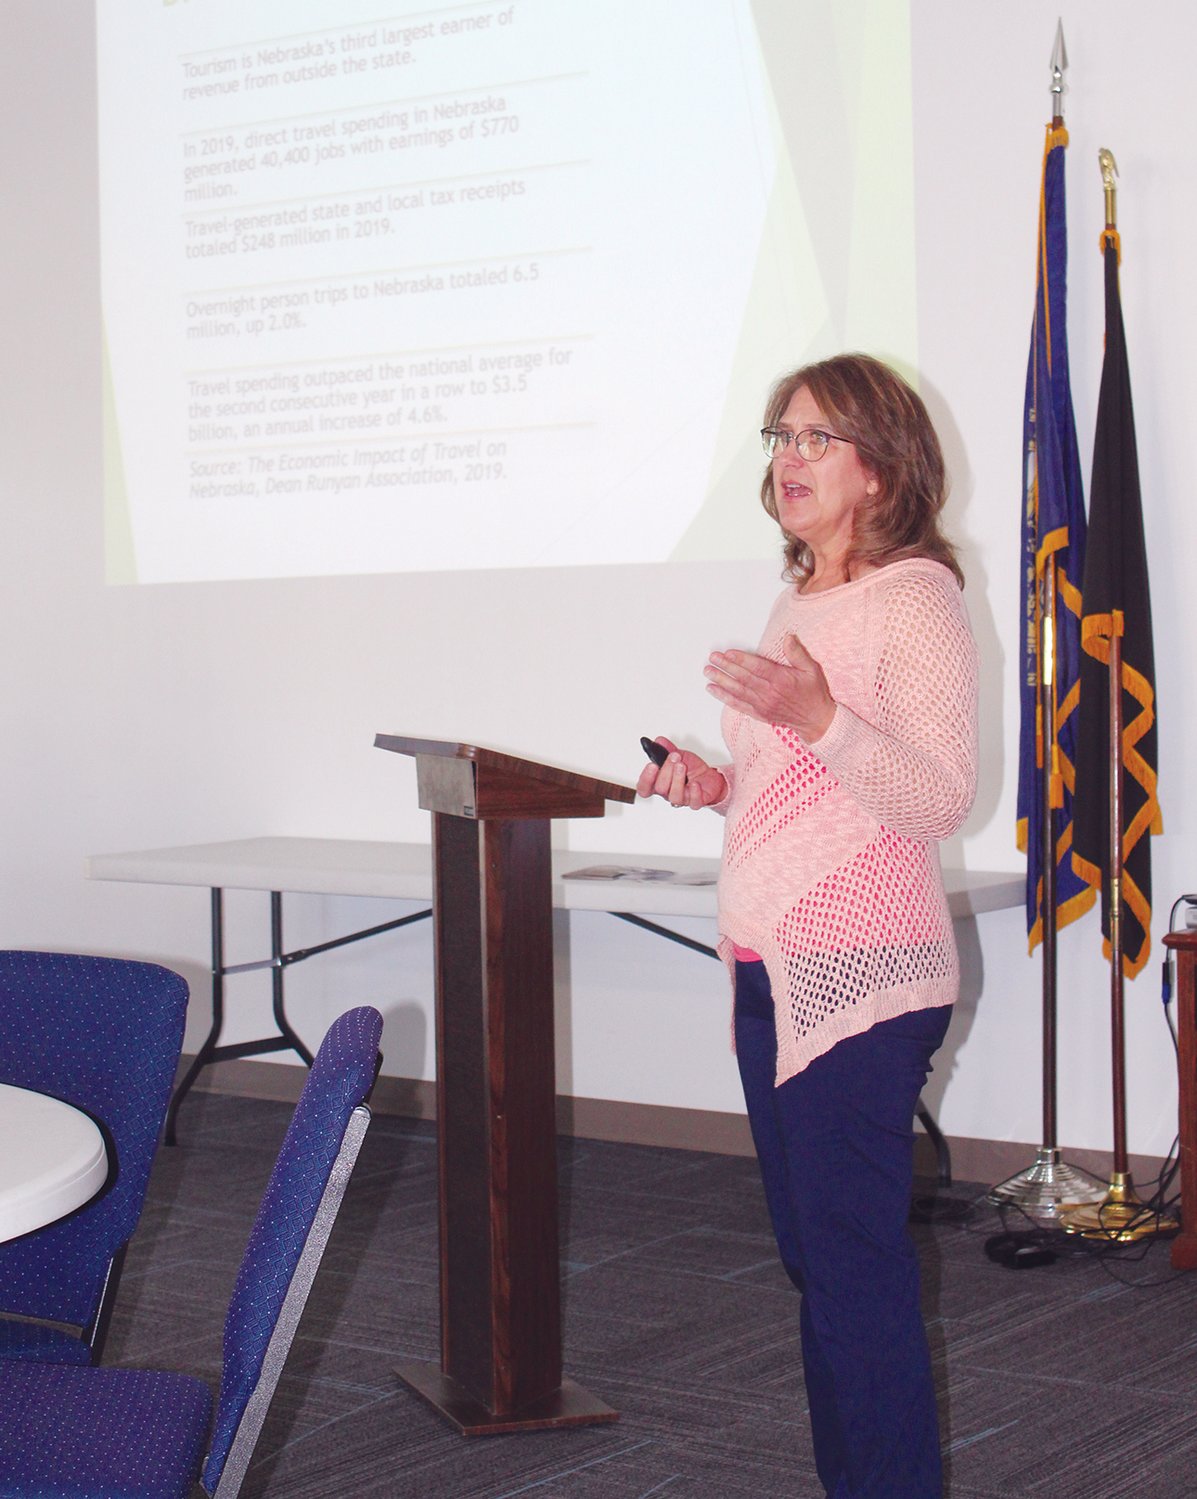 Karen Kollars with the Nebraska Tourism Council gave insights on how to use tourism to provide extra income in agriculture.